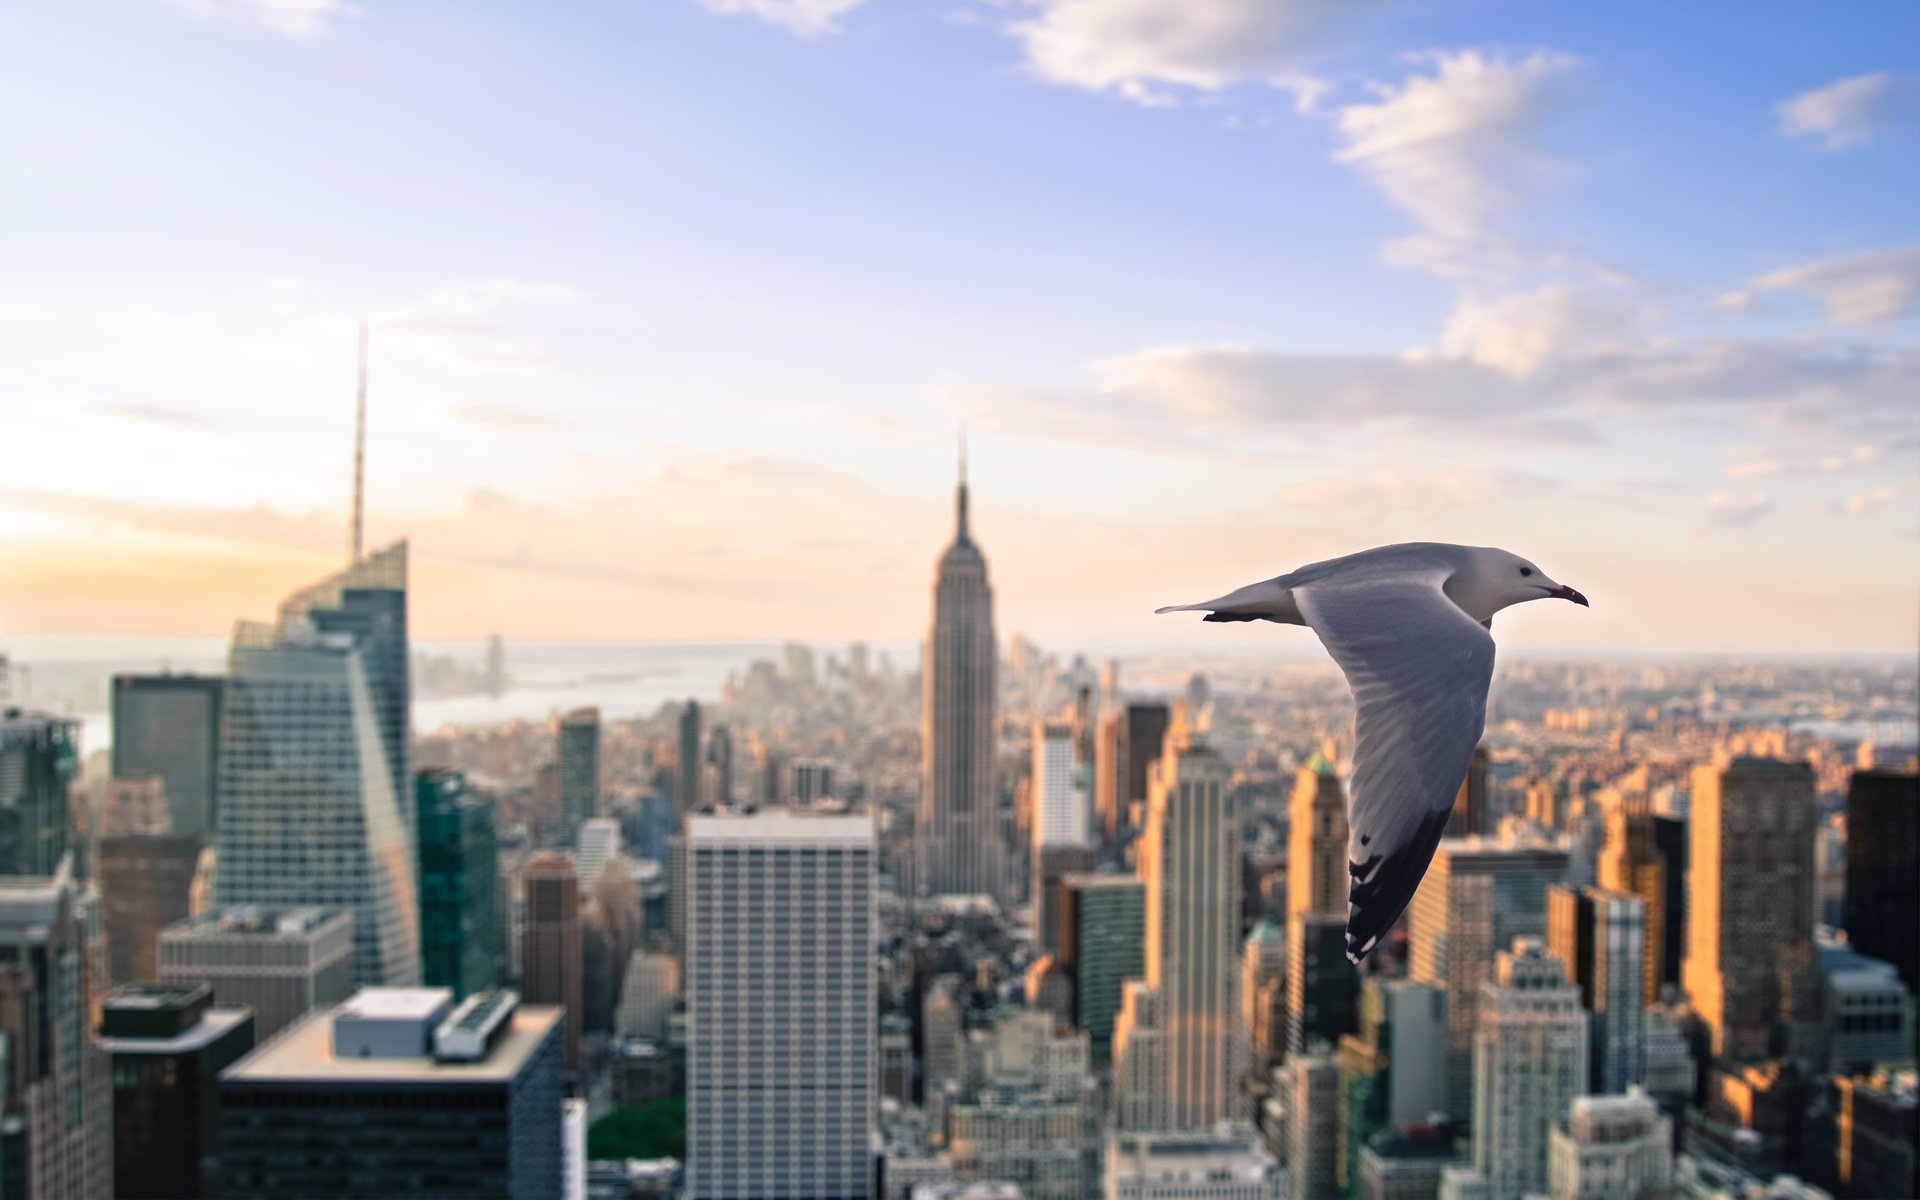 A seagull flies over the central part of skyscrapers in New York